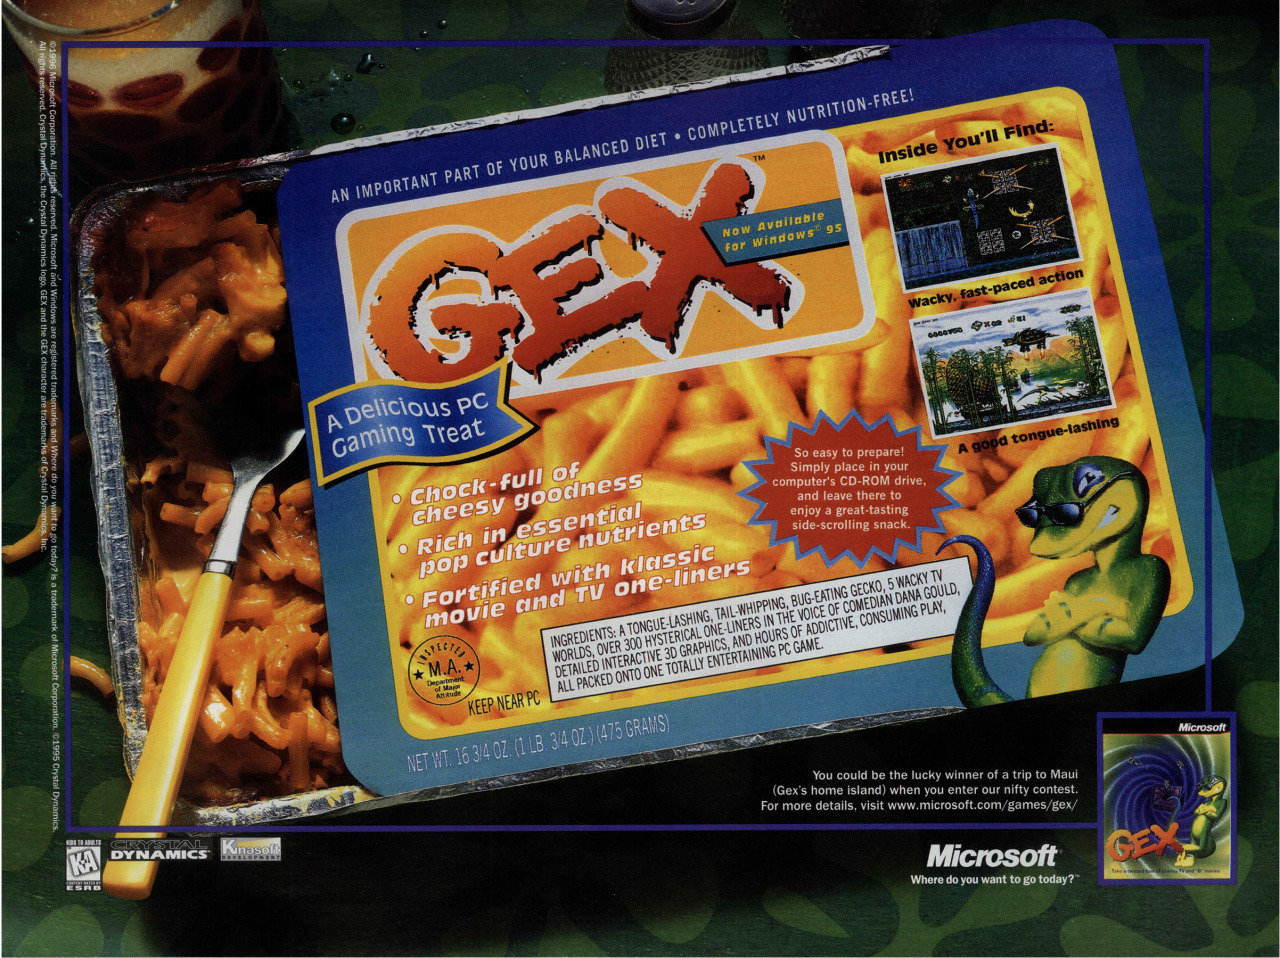 Gex
“A Delicious PC Gaming Treat”